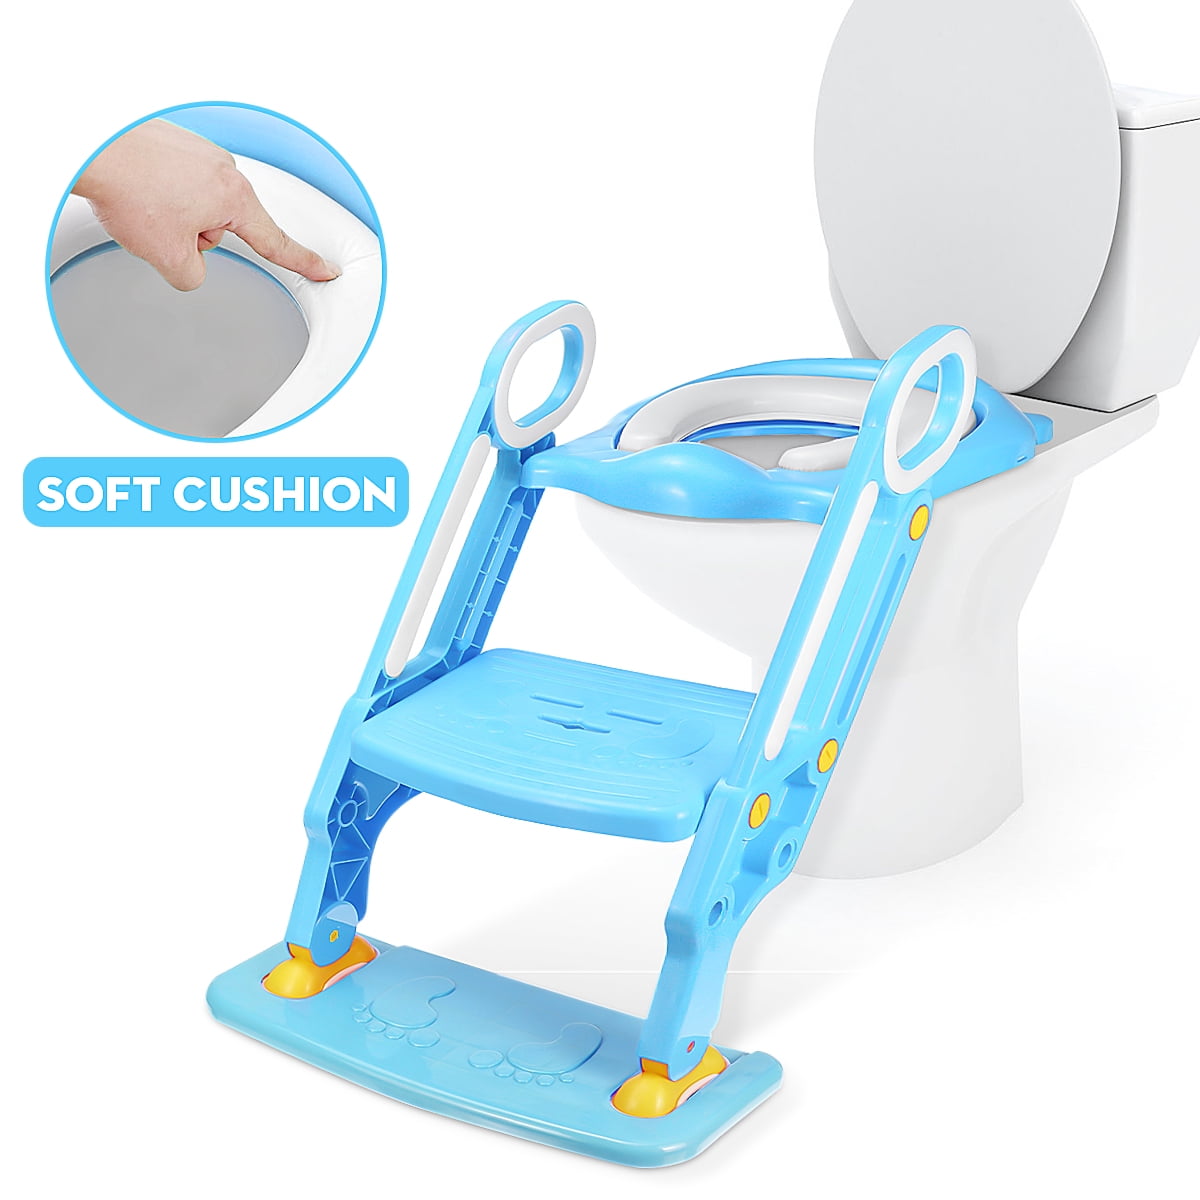 Baby Child Potty Toilet Kids Potty Toilet Trainer Seat Step Stool Ladder Adjustable Training Chair Training Folding Seat 2Colors-BU2 